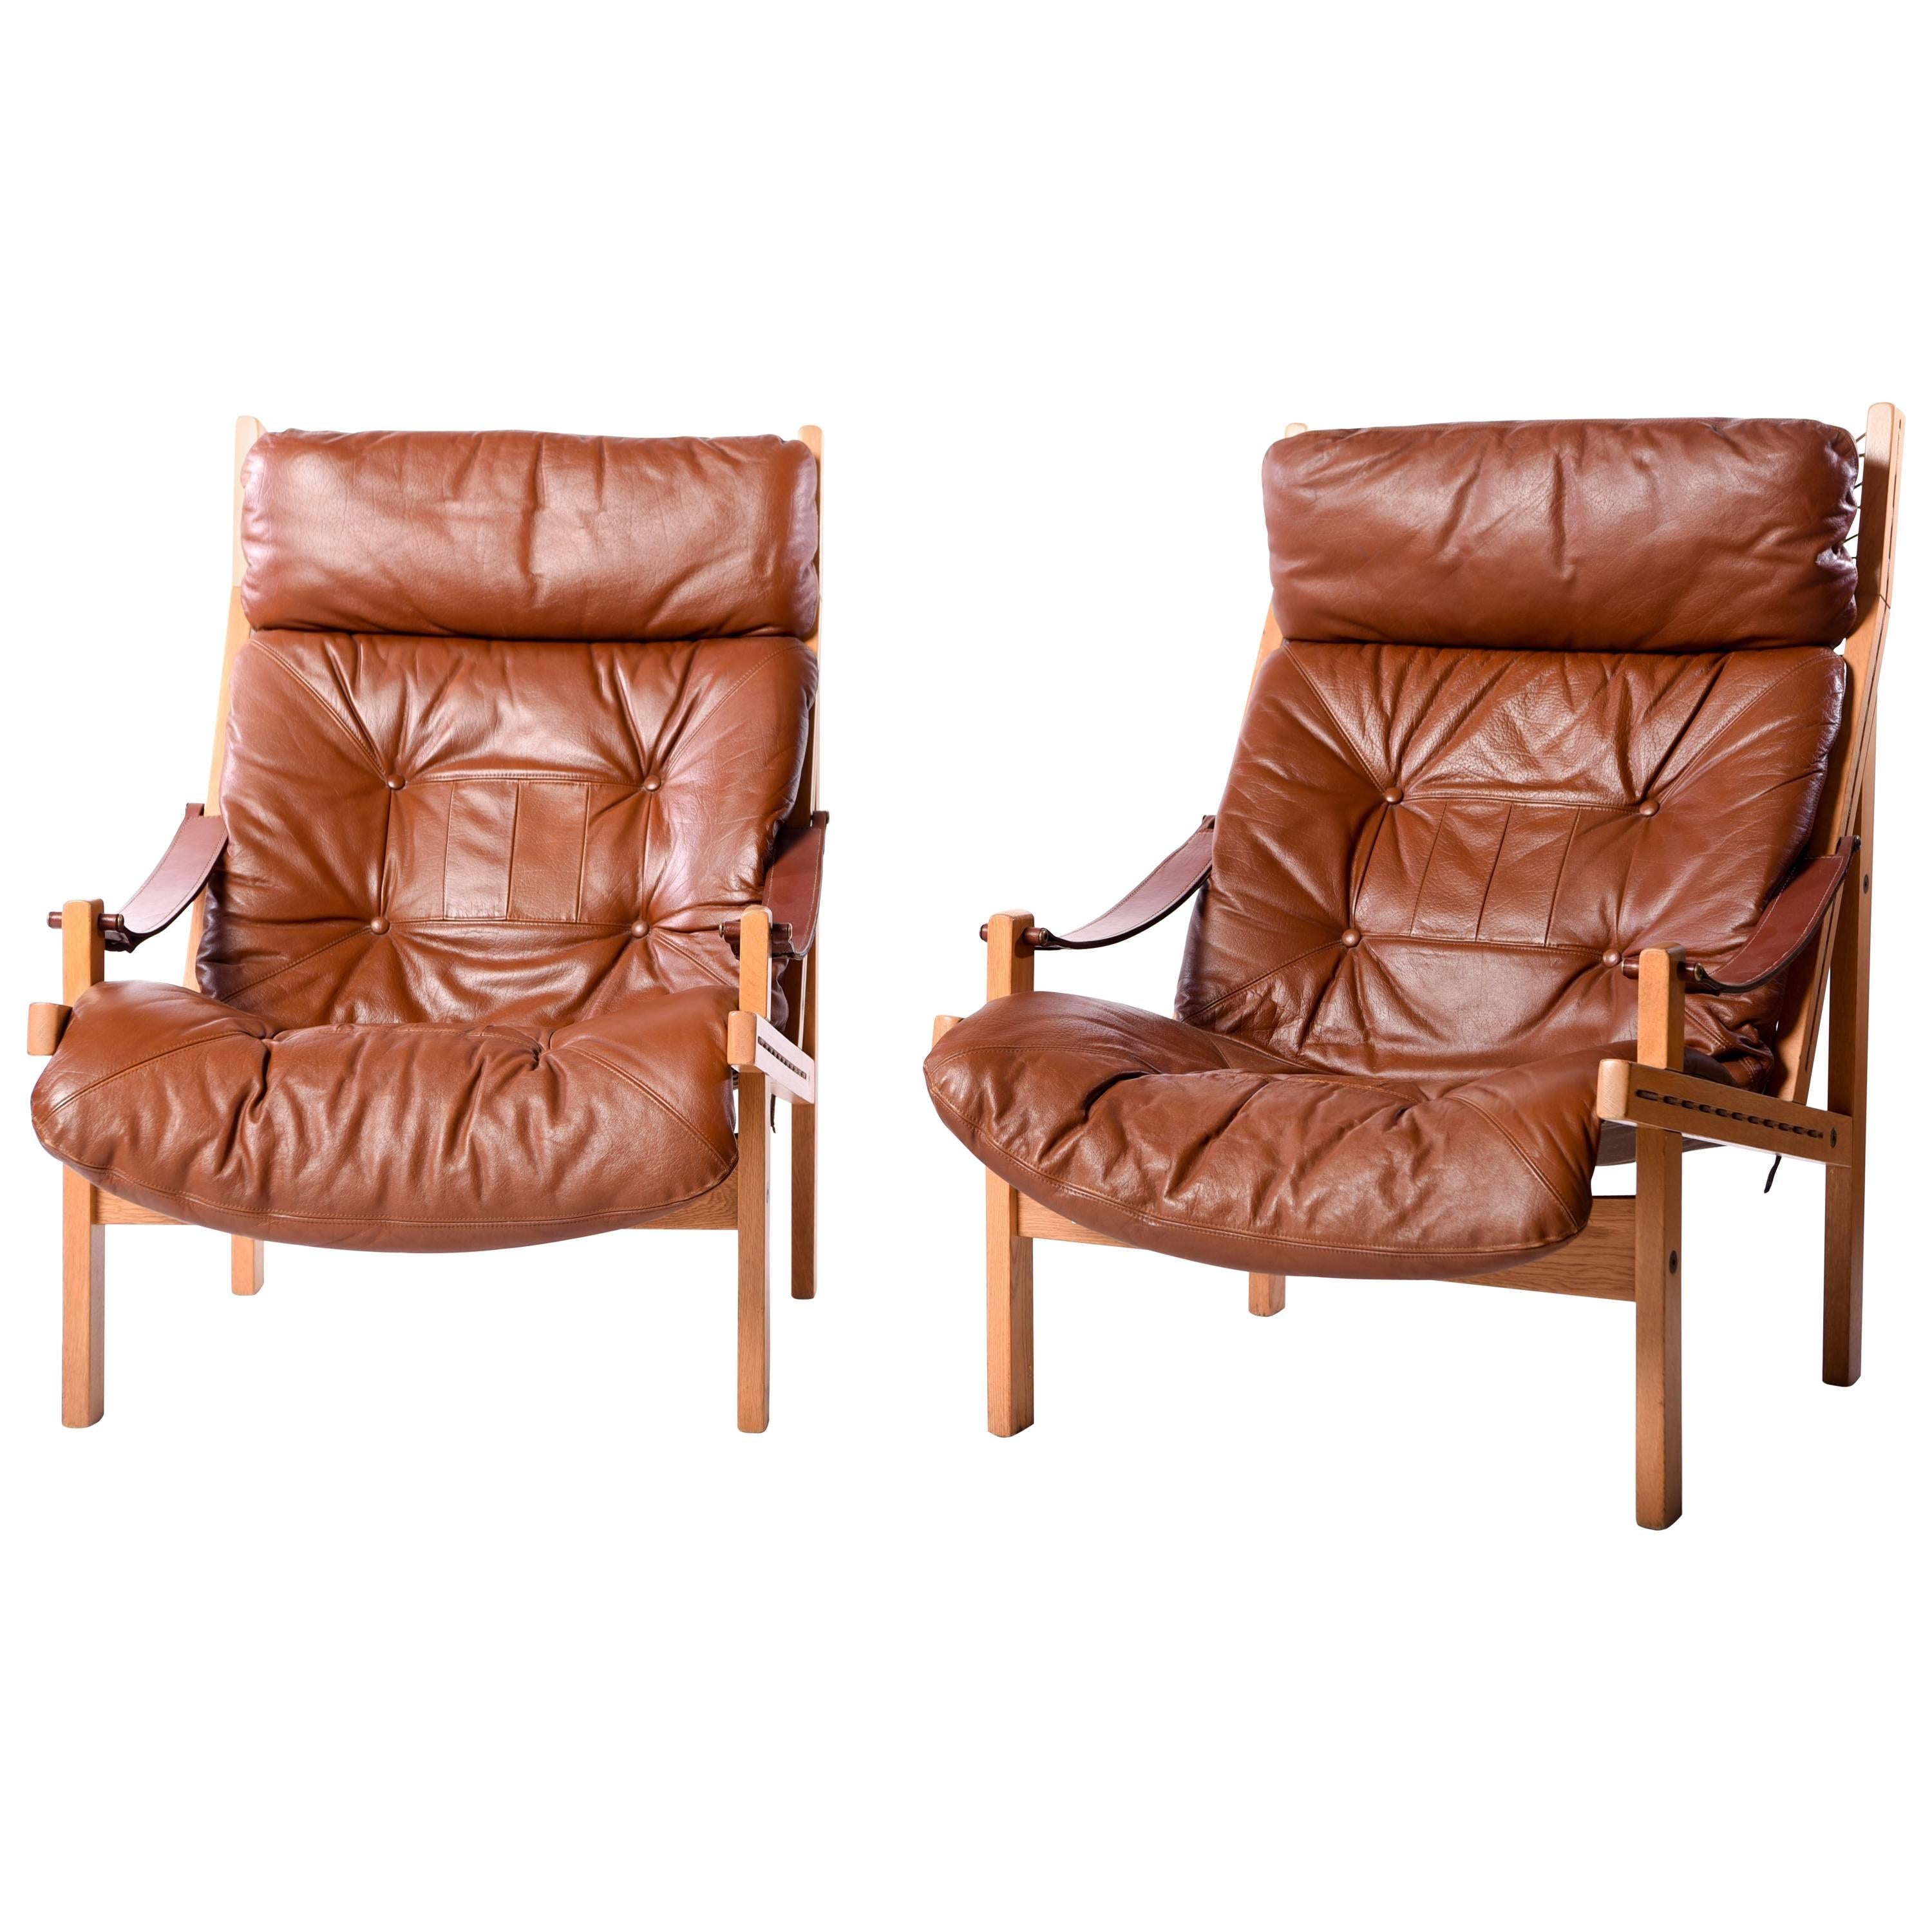 Pair of Hunter Lounge Chairs by Torbjørn Afdal for Bruksbo Norway, circa 1960s